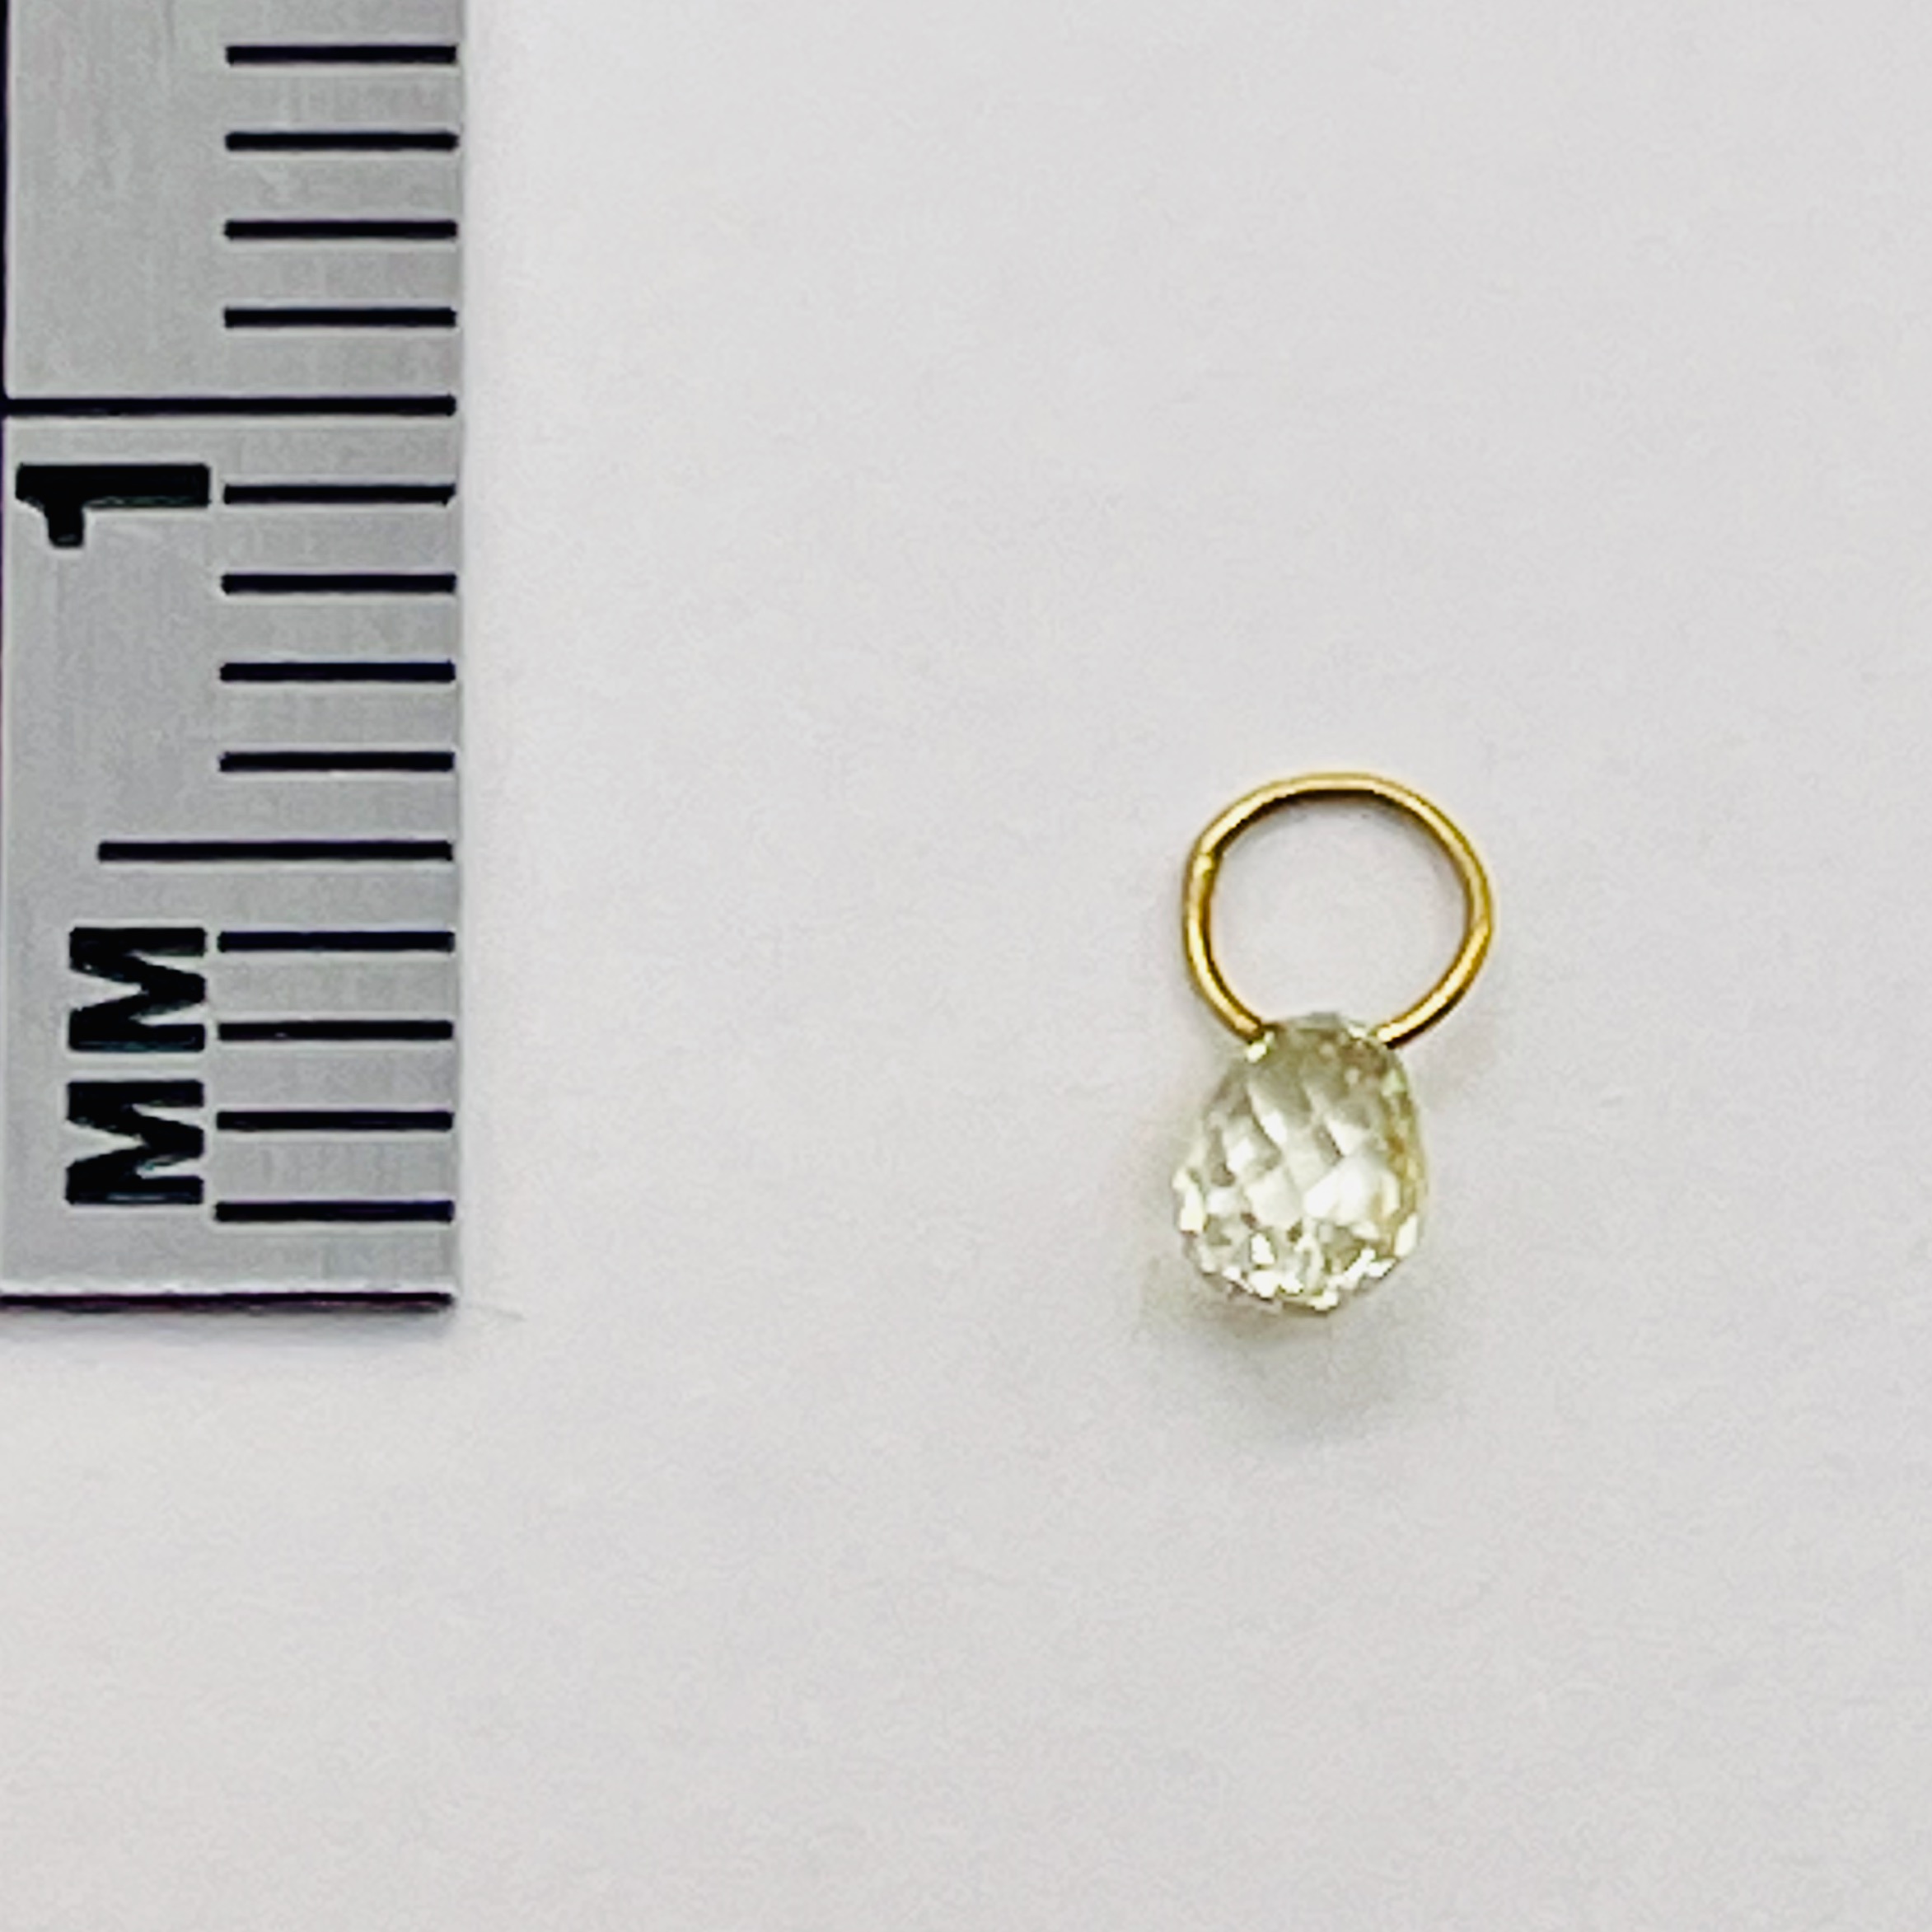 0.28cts Natural Canary Diamond 18K Gold Pendant | 3.25x2.5x2.25mm | - image 4 of 12